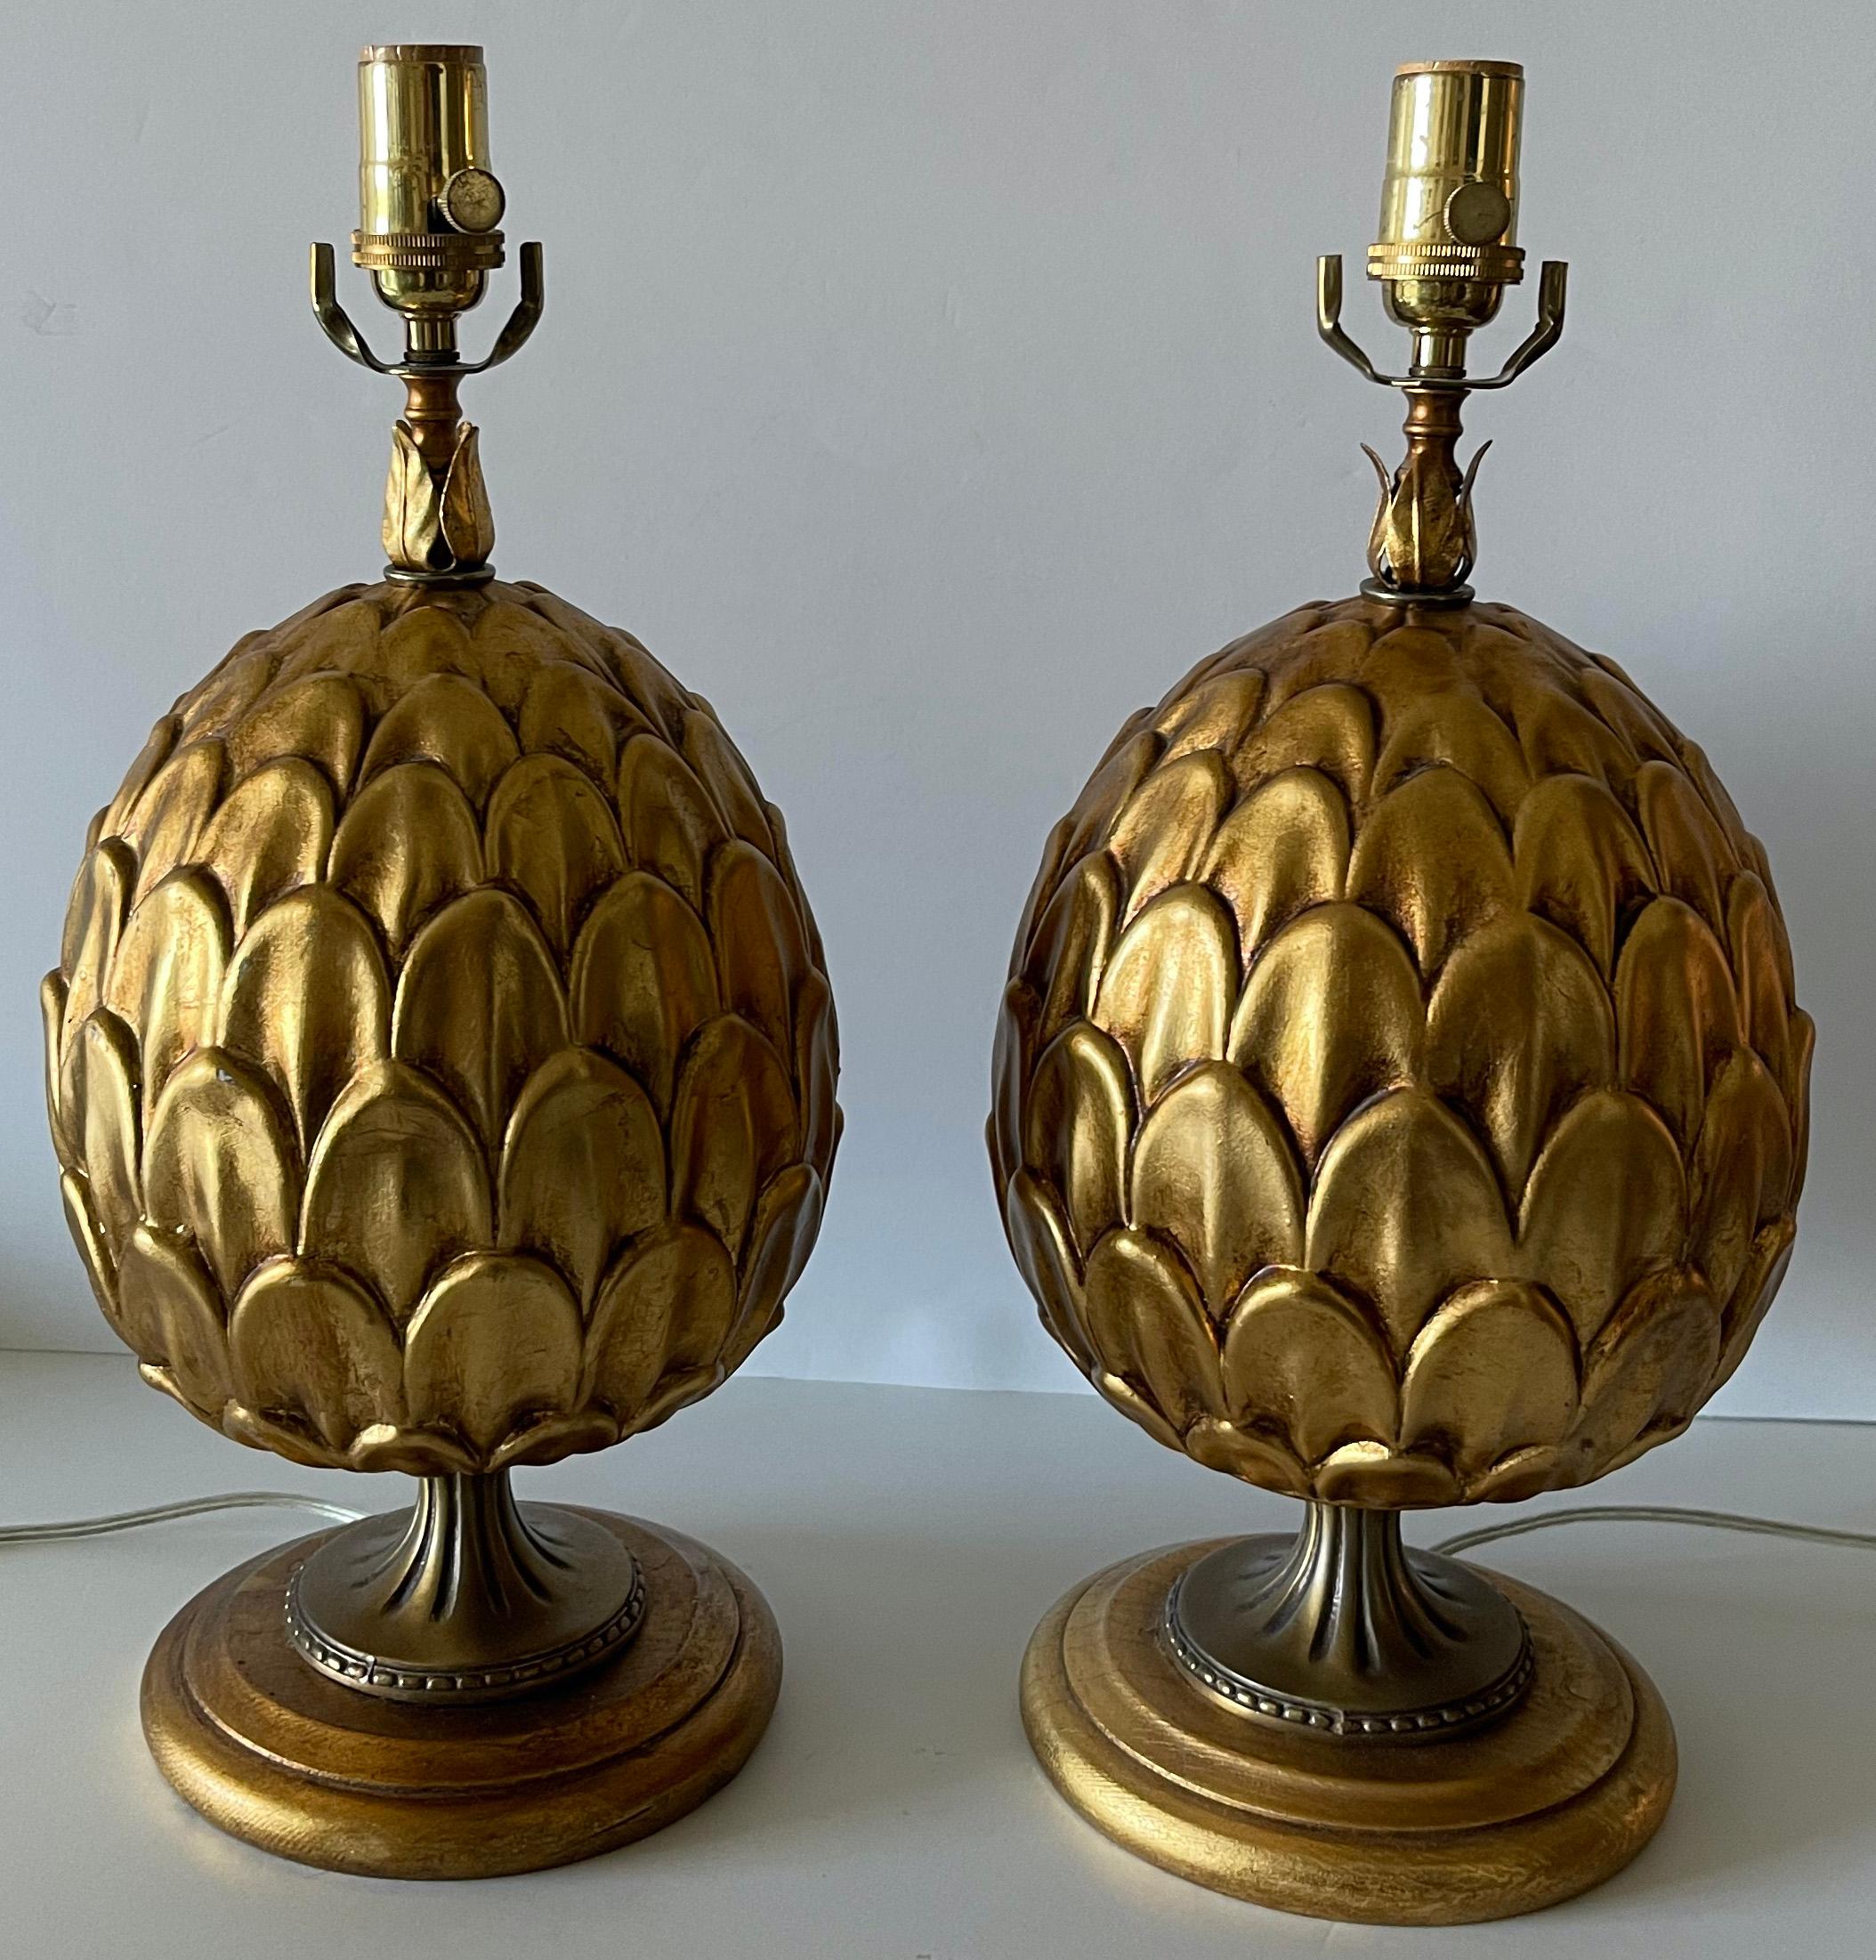 Pair of Italian gilt metal artichoke lamps. Gilt metal artichoke atop a turned round giltwood base. Newly rewired with new brass sockets. Each lamp takes one light bulb (not included). 